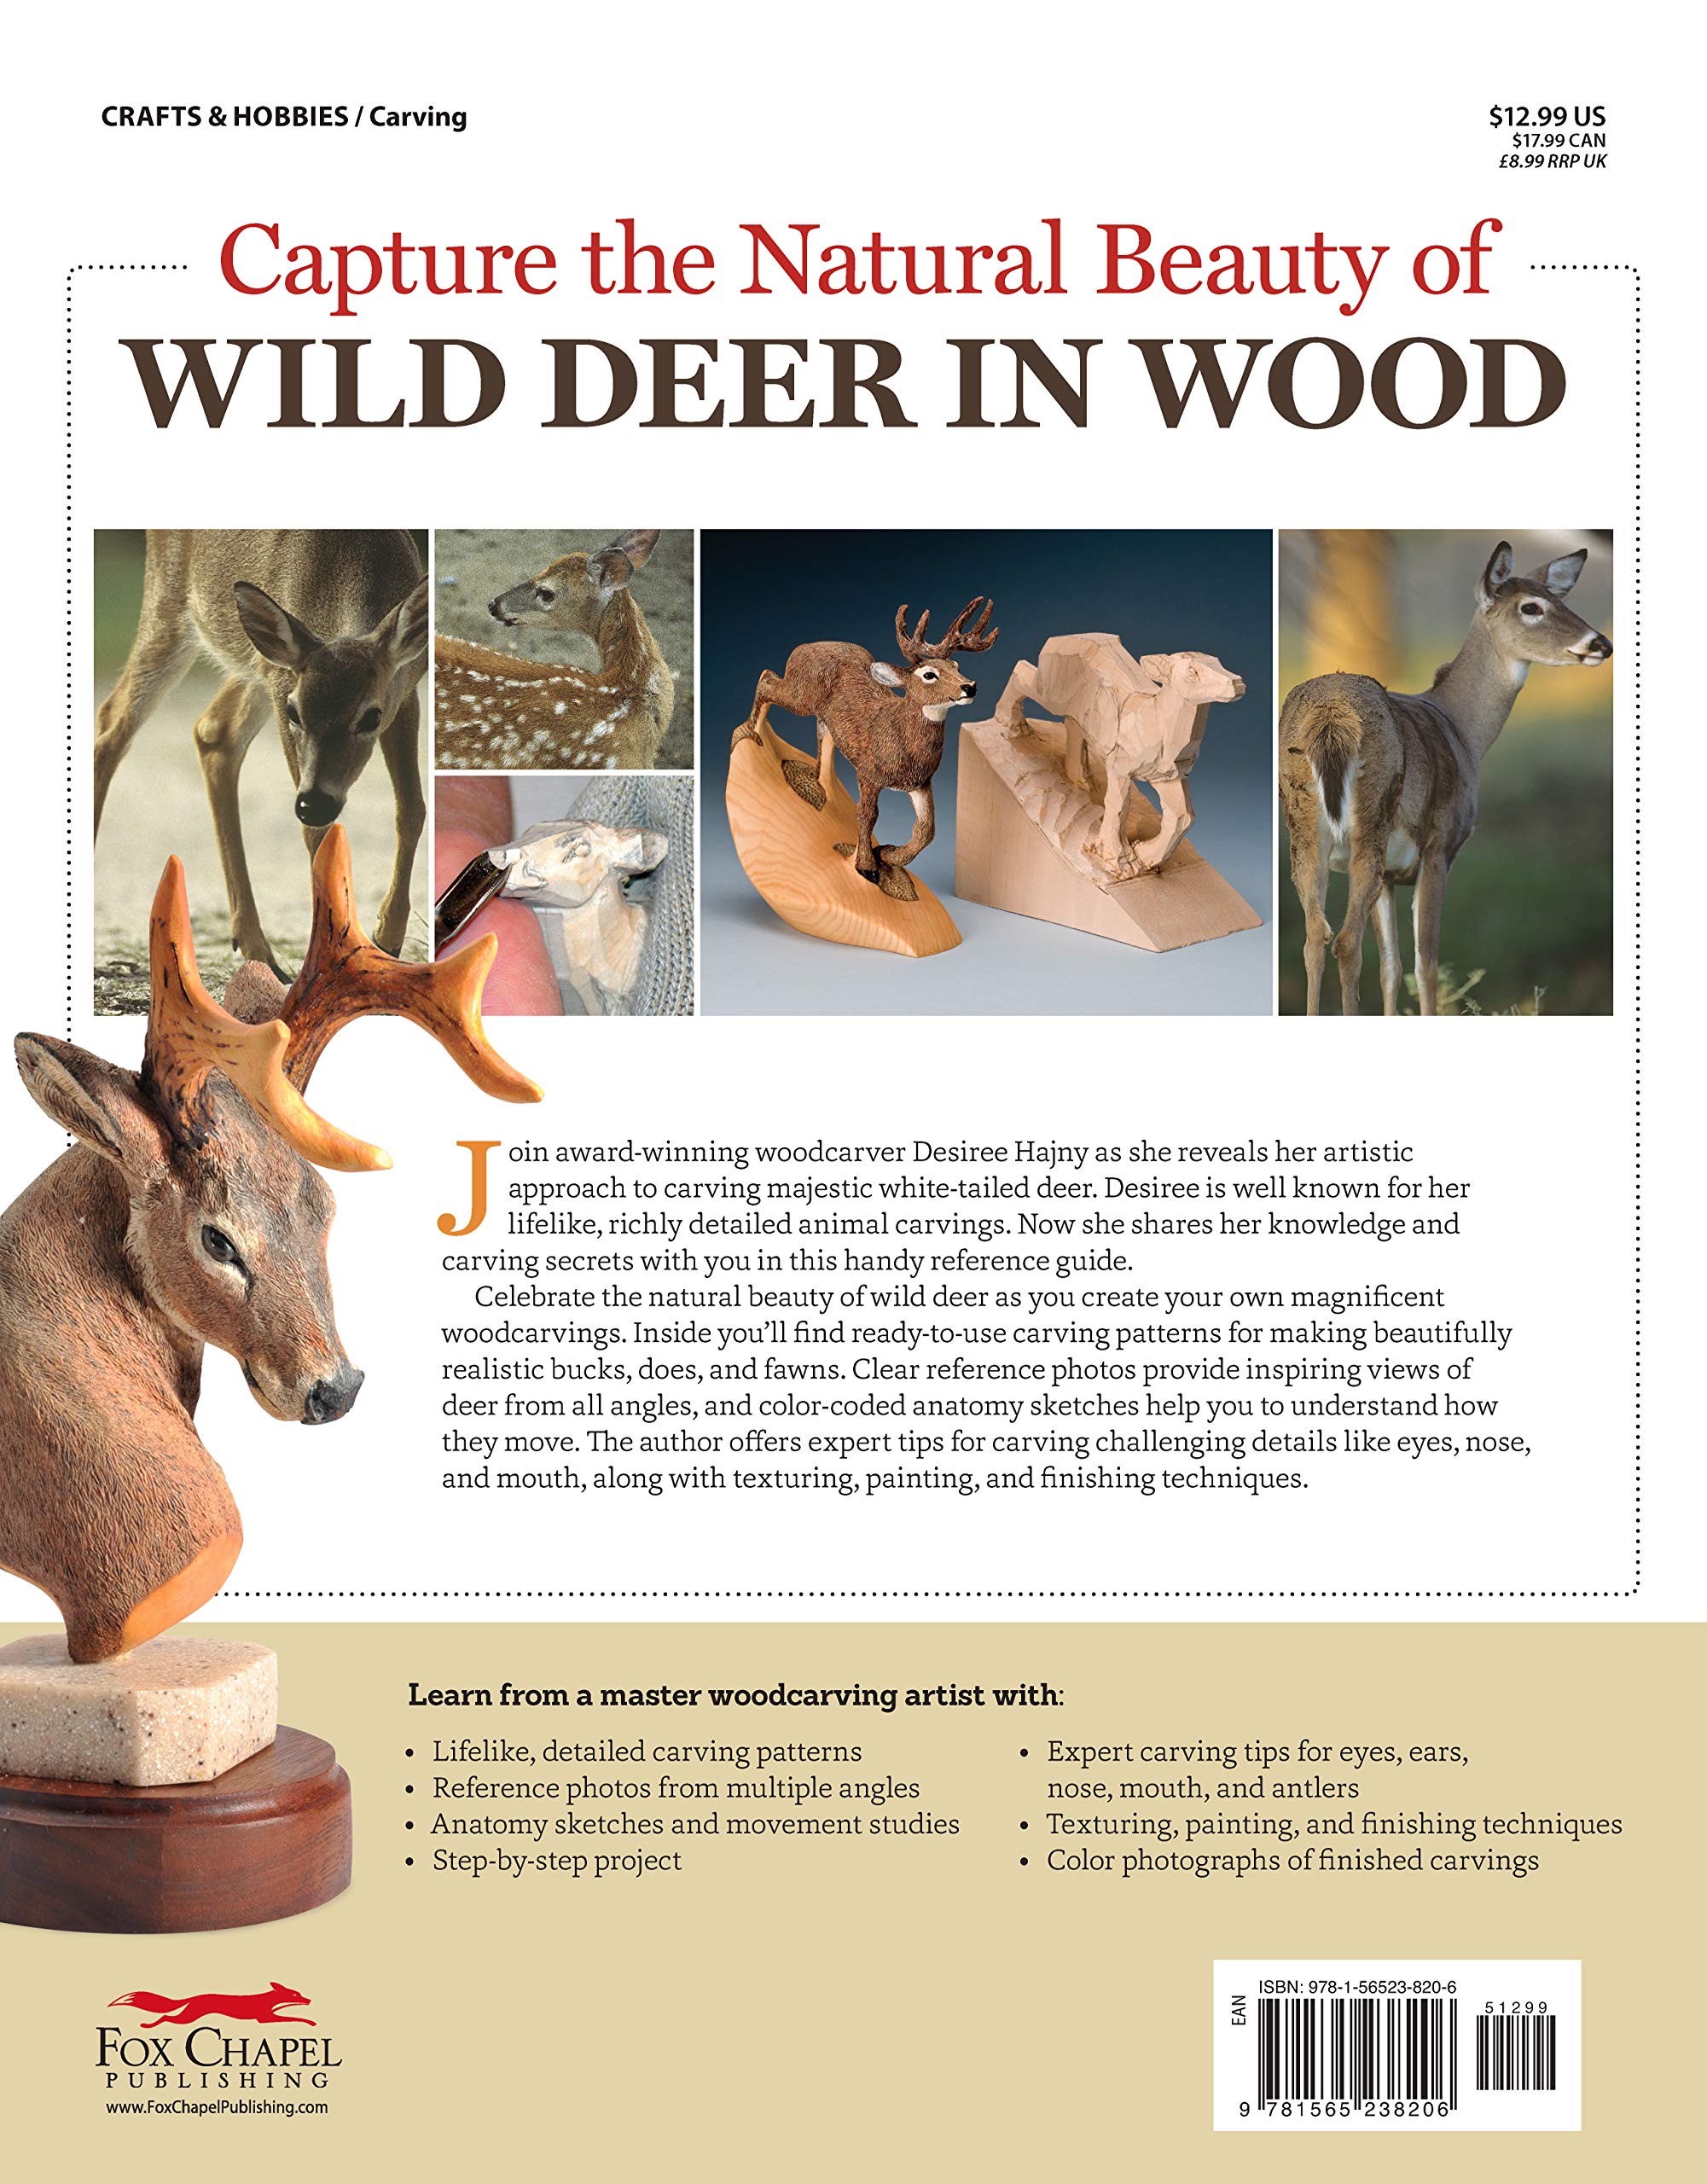 Carving Deer: Patterns and Reference for Realistic Woodcarving